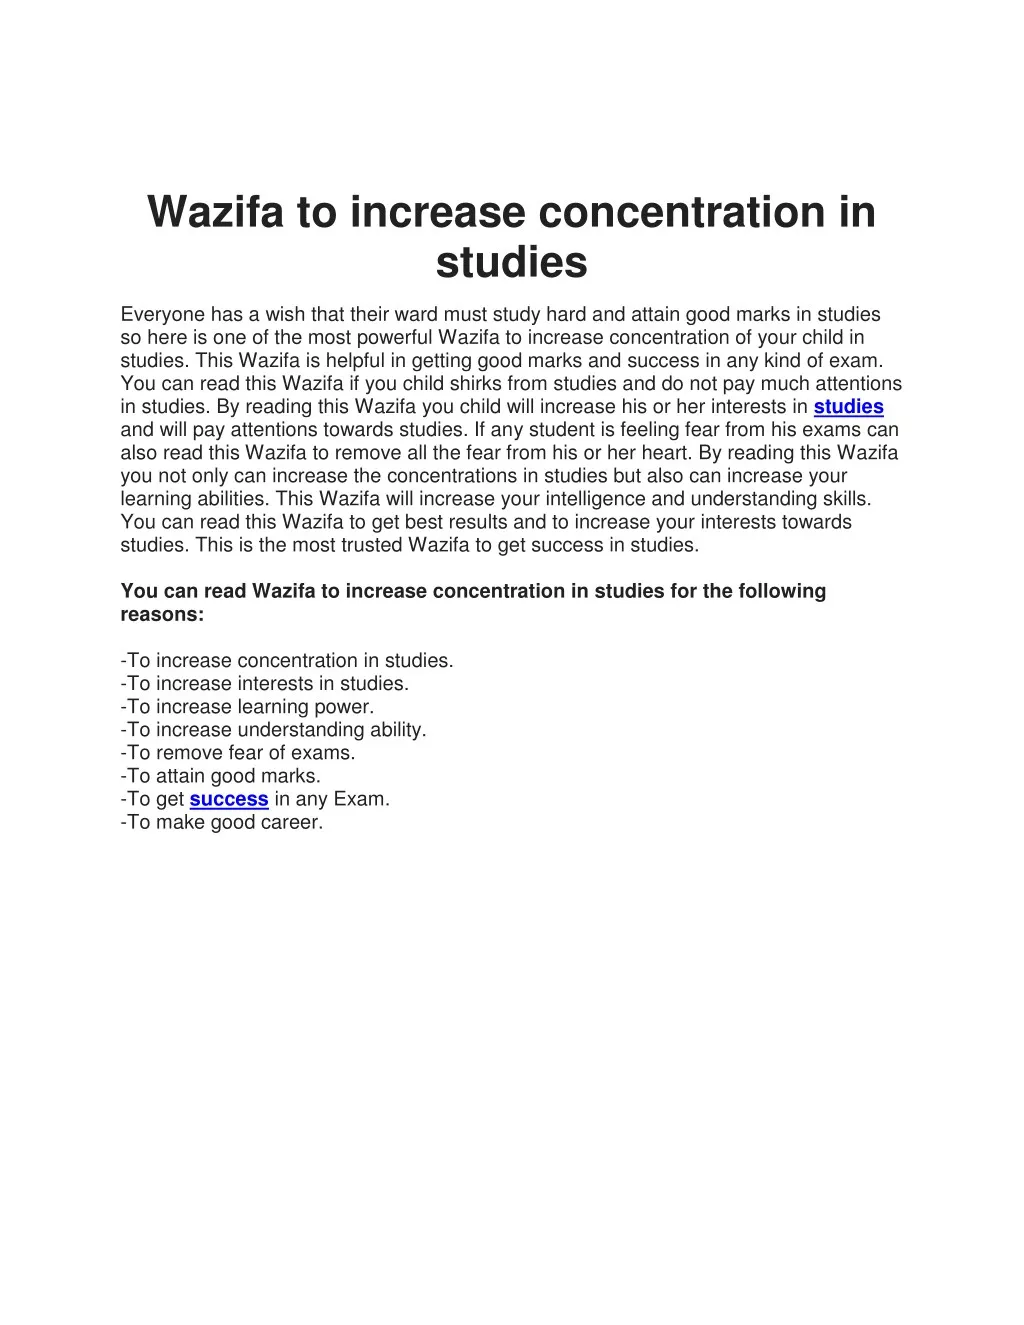 wazifa to increase concentration in studies